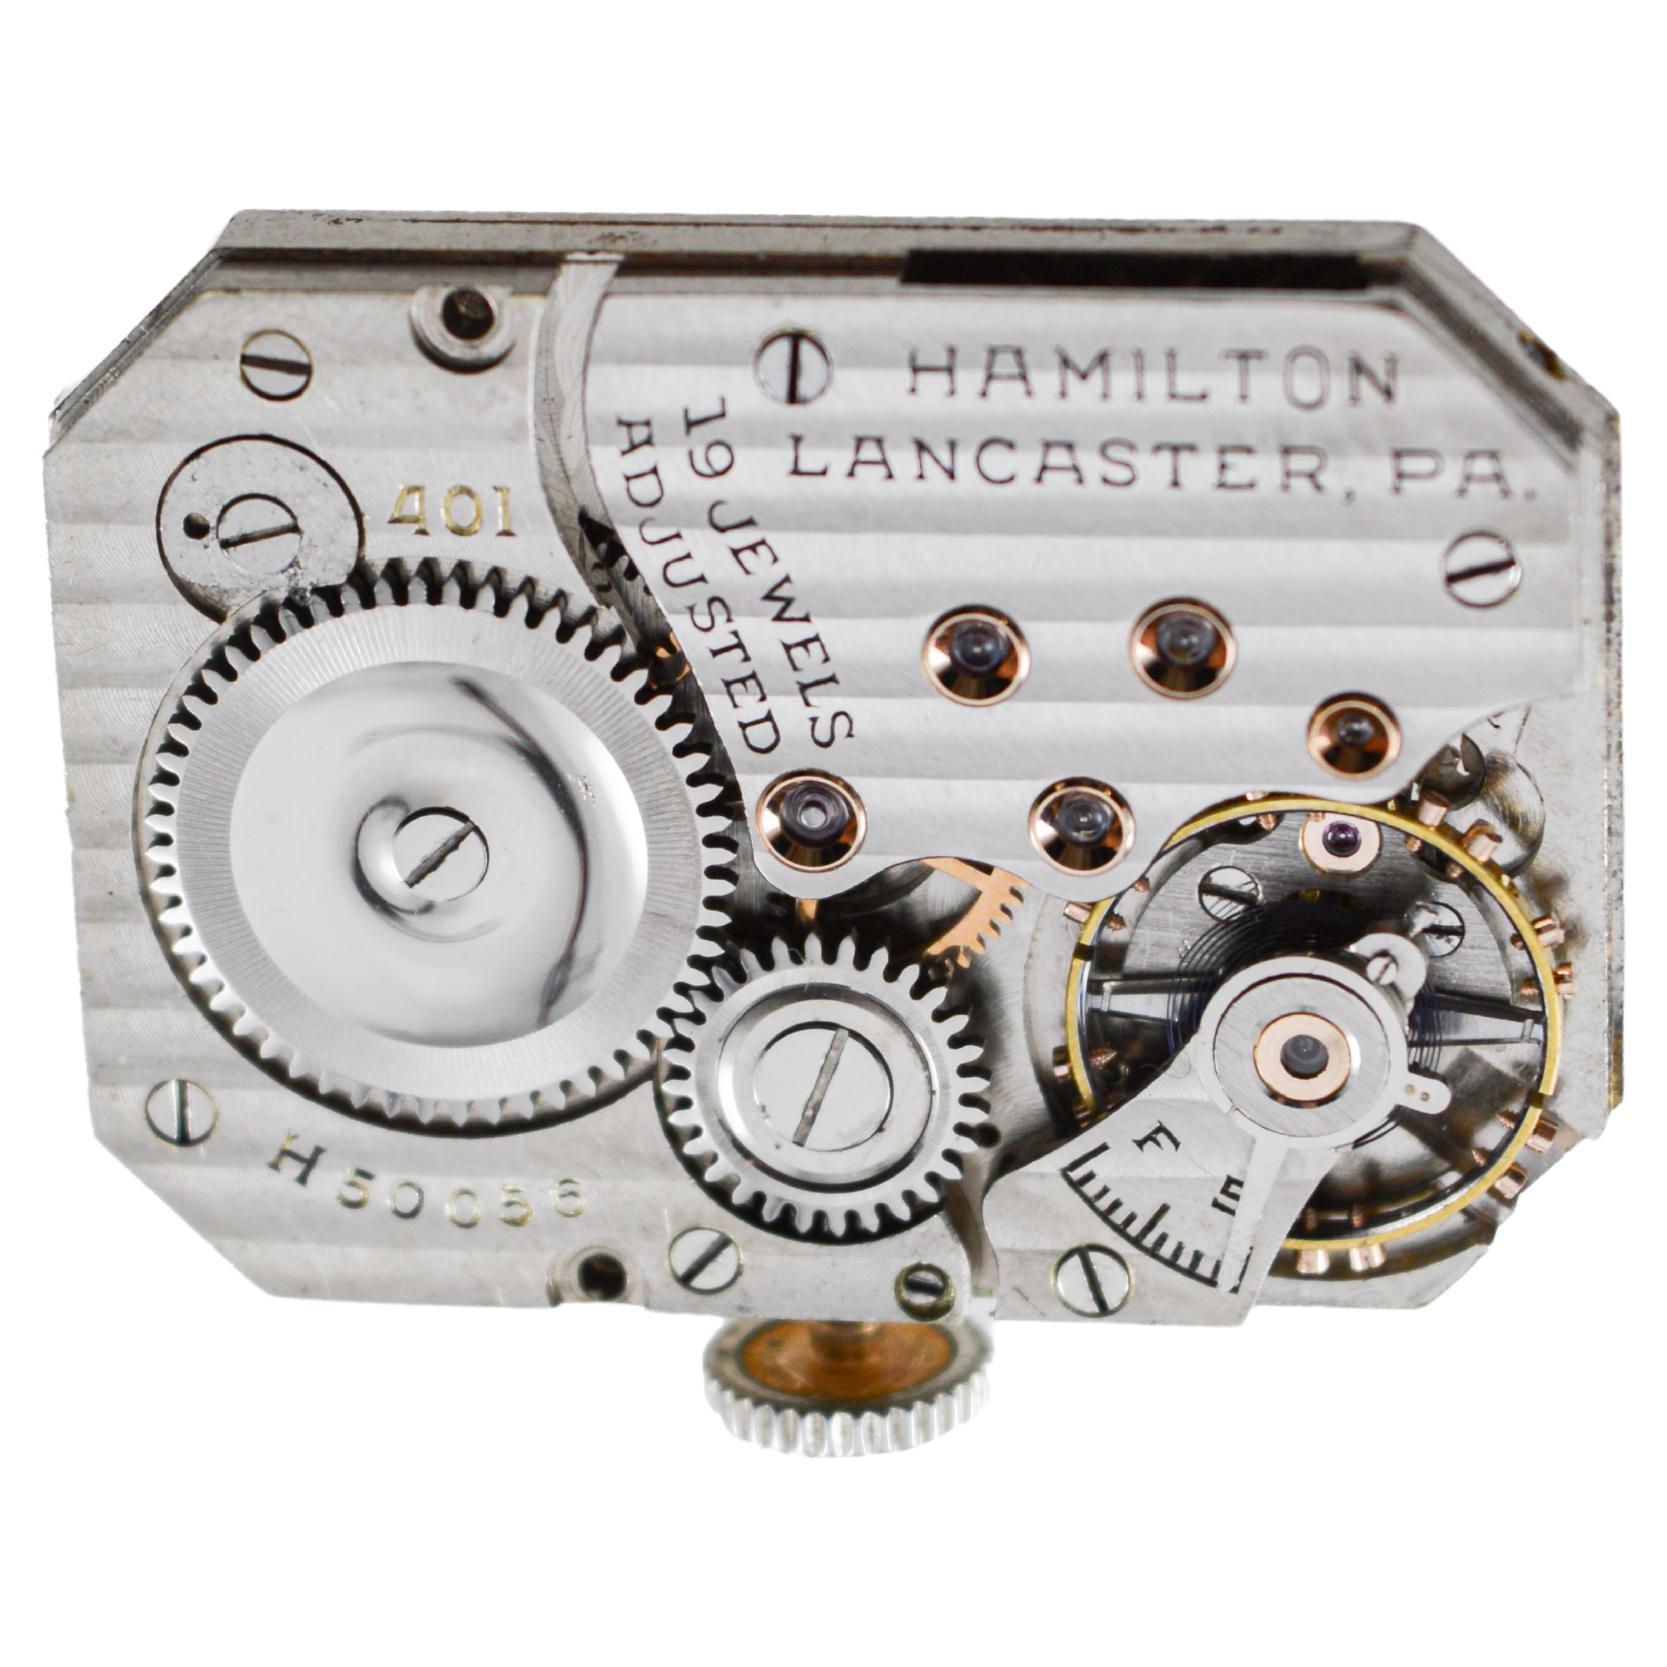 Hamilton 14K Solid White Gold Art Deco Watch with Presentation Back from 1932 For Sale 13